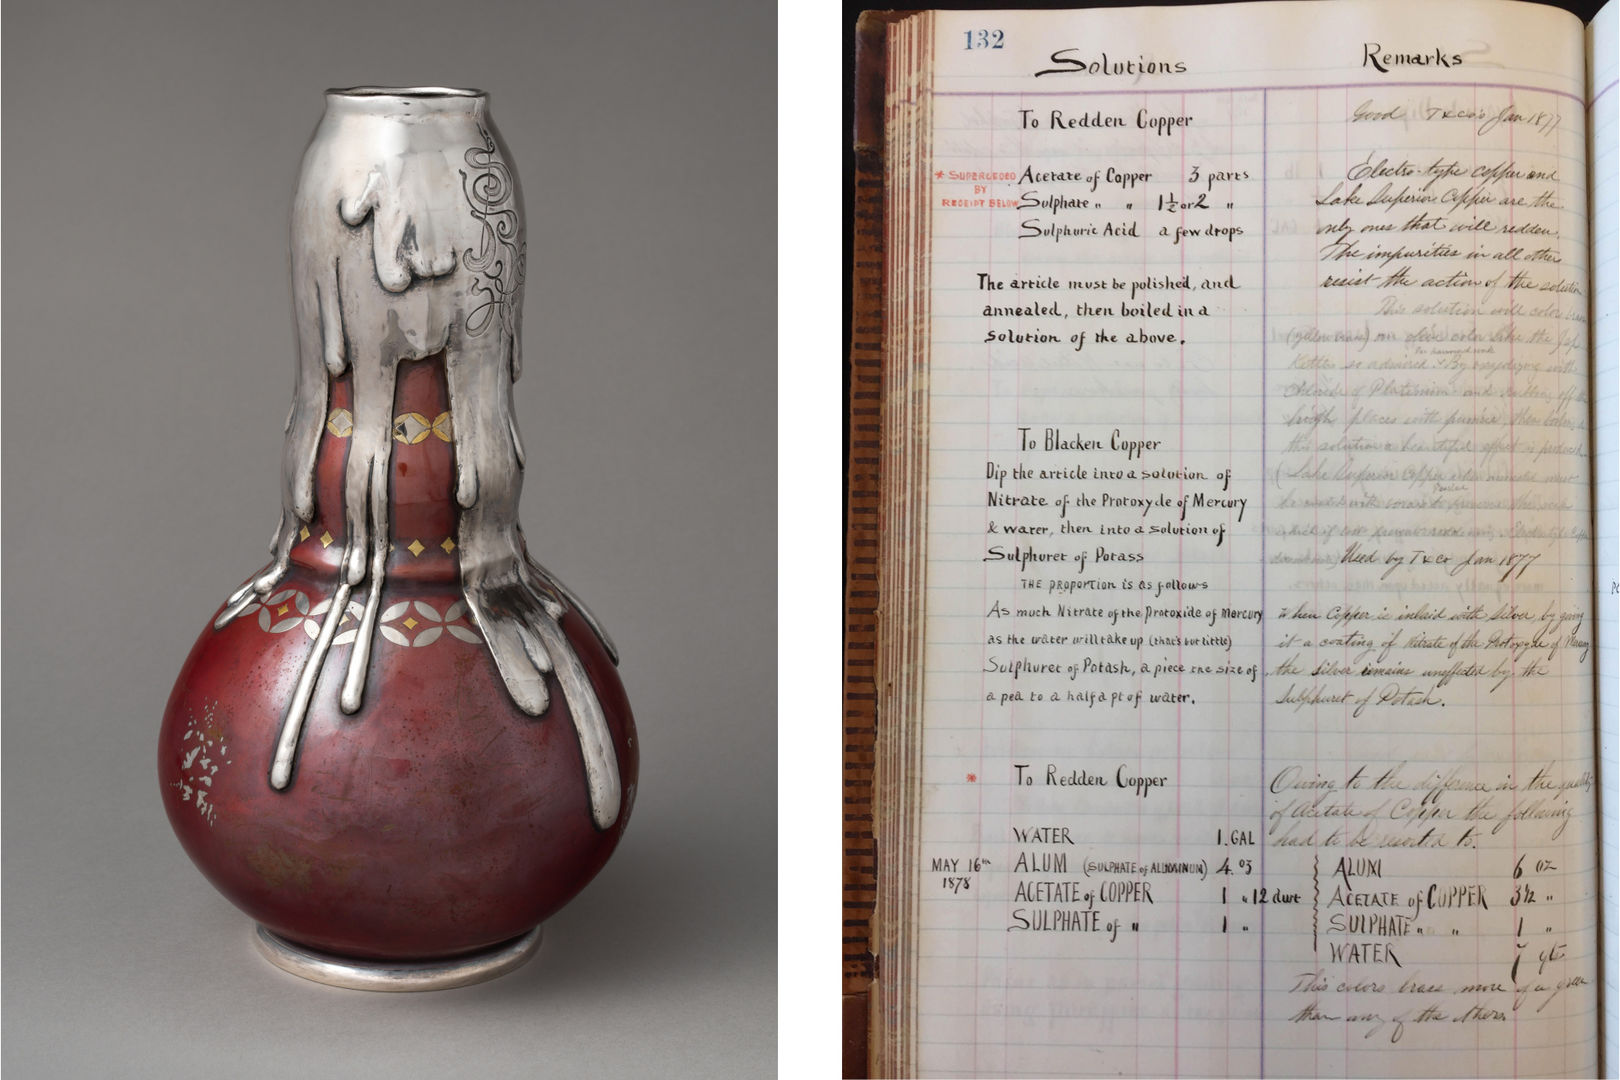 A composite image of a vase and a document. On the left, the patinated copper vase is designed with silver detailing that mimics drips down the sides of the neck of the vase. On the right, a handwritten technical document outlines how to redden copper.